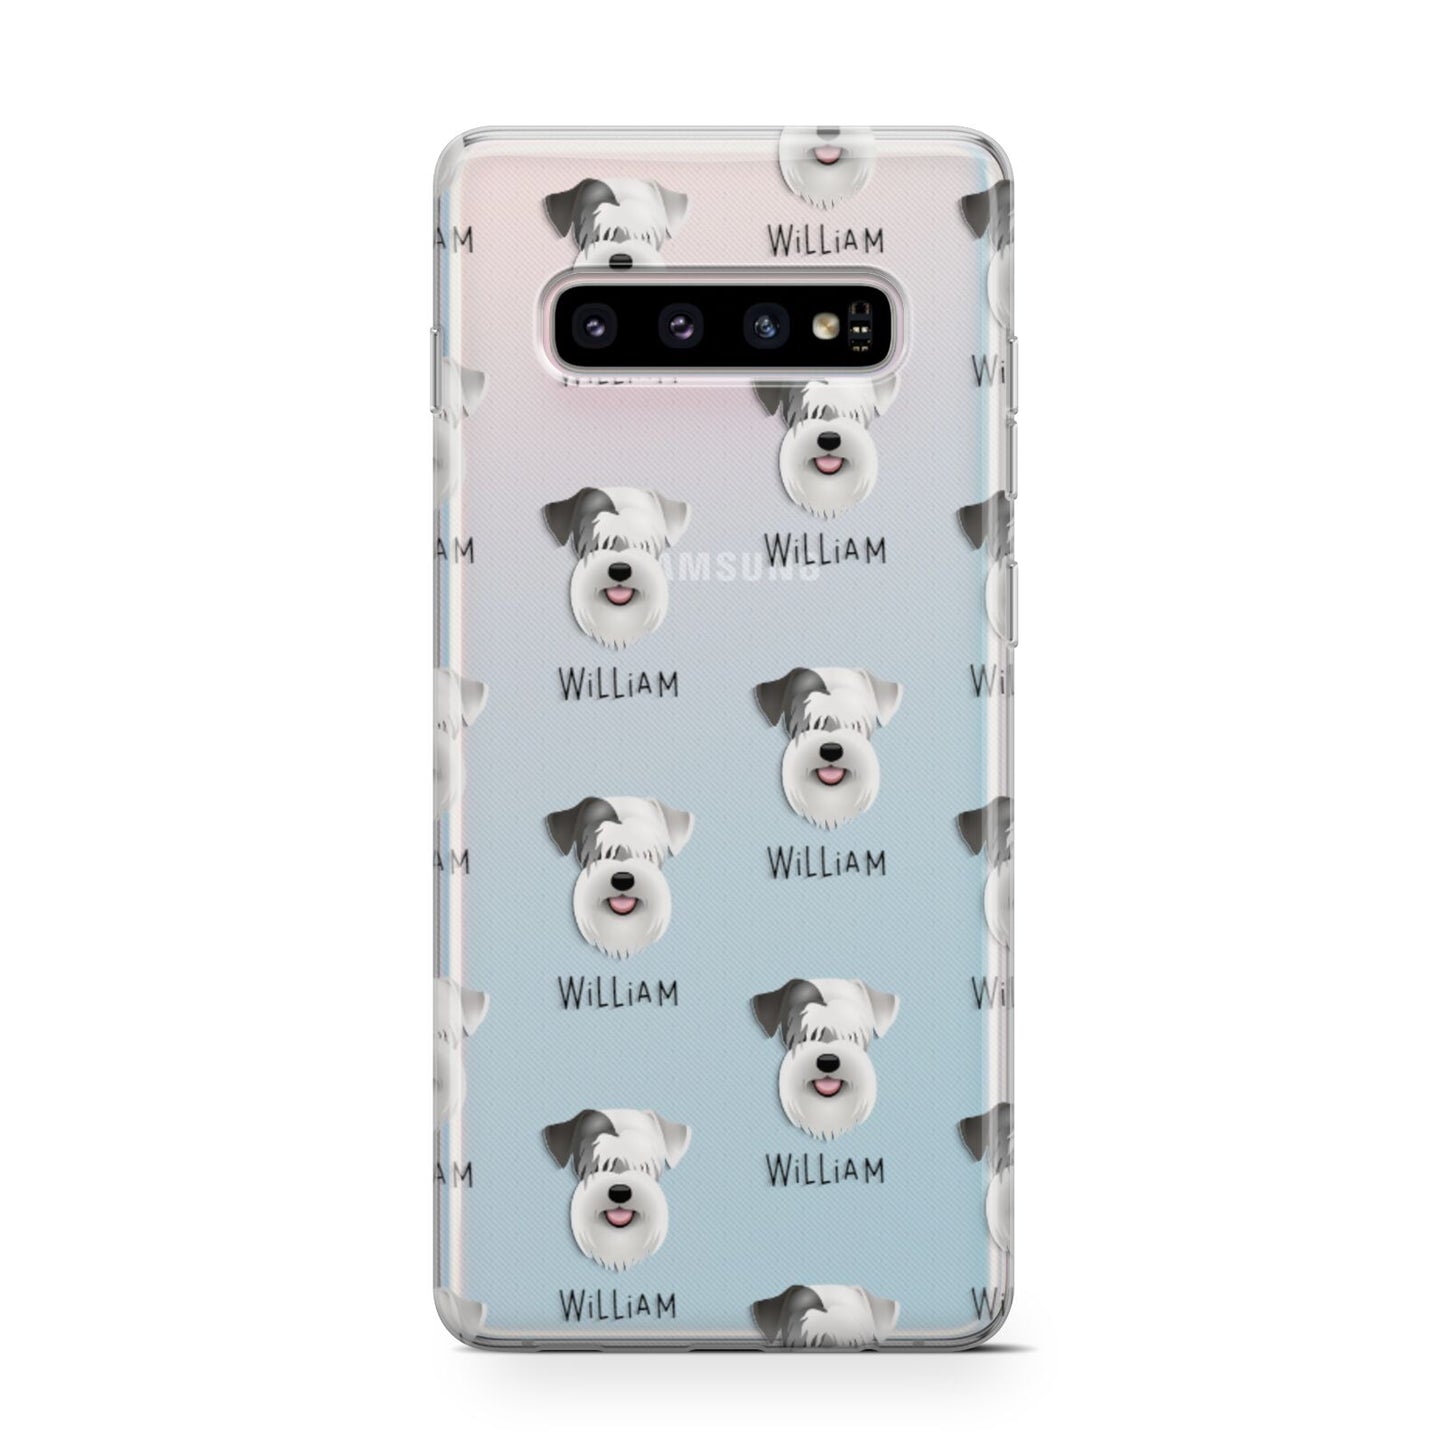 Sealyham Terrier Icon with Name Samsung Galaxy S10 Case